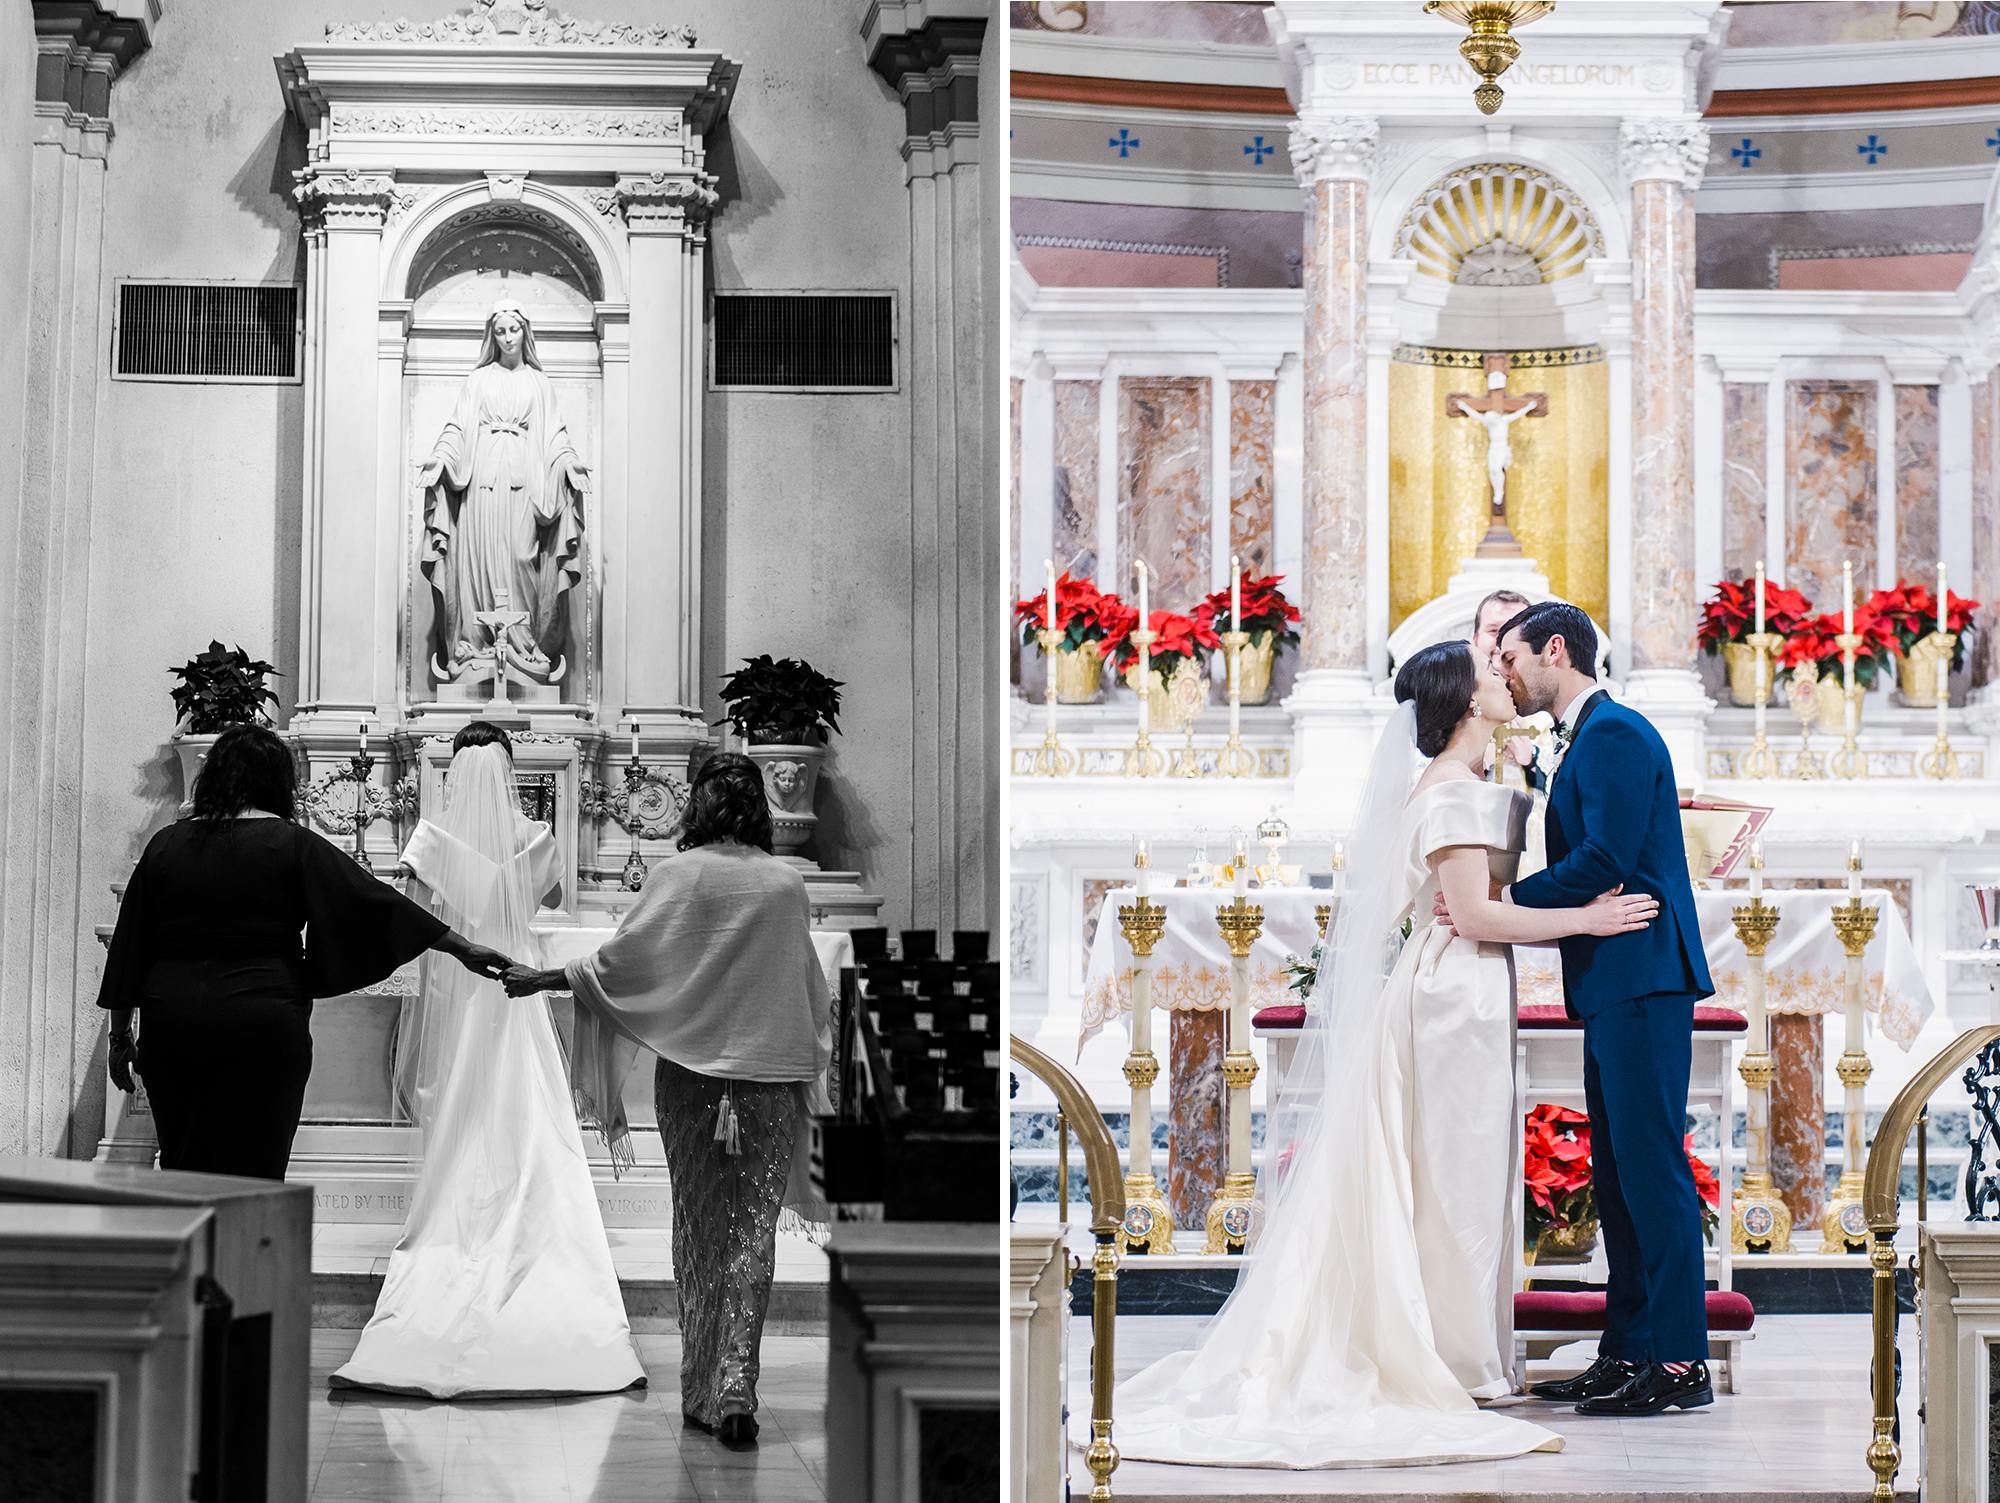 Bride and groom kissing at alter during wedding ceremony